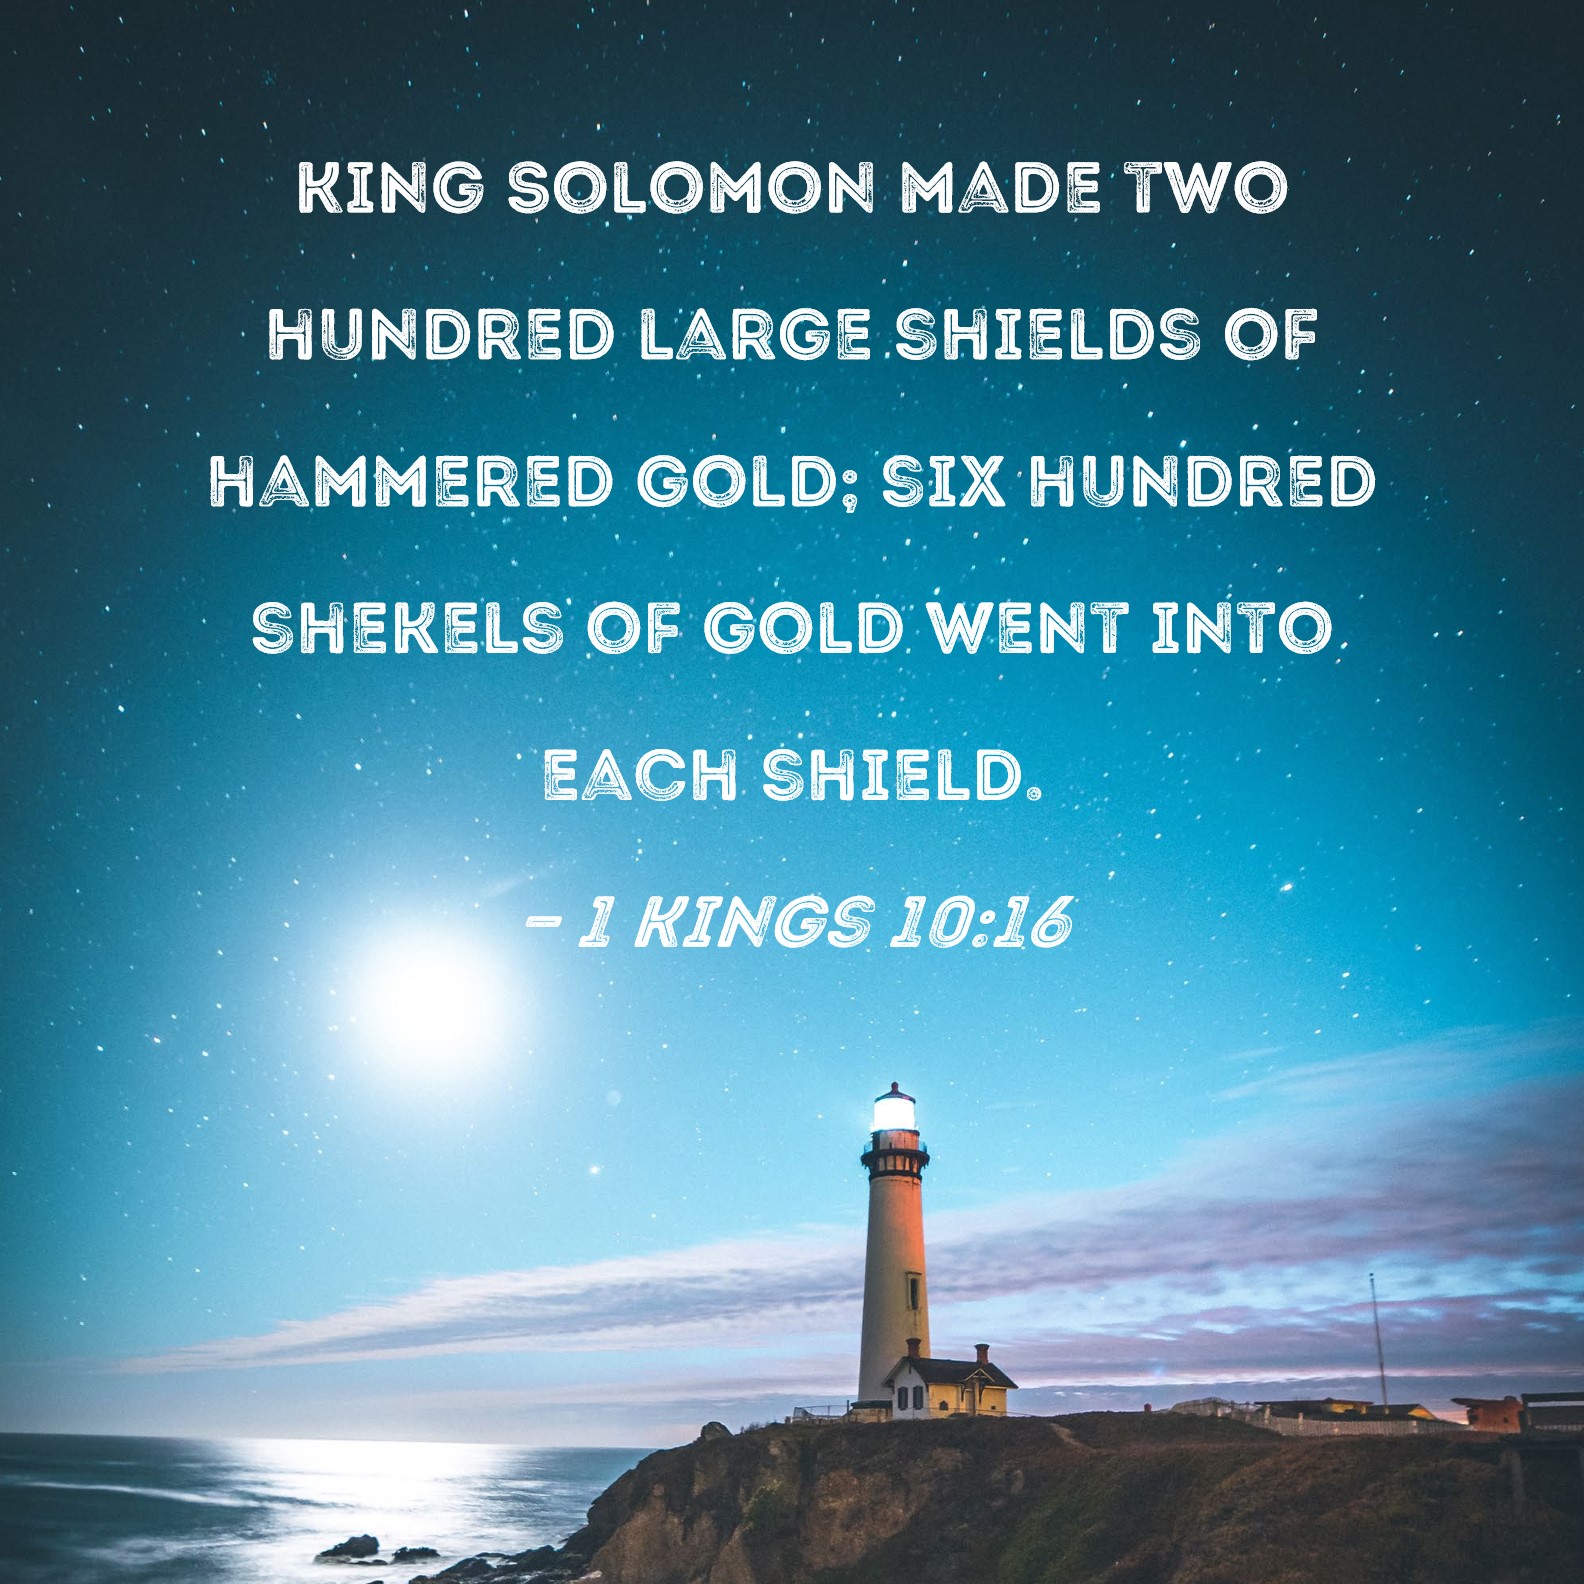 1 Kings 10:16 King Solomon made two hundred large shields of hammered gold;  six hundred shekels of gold went into each shield.